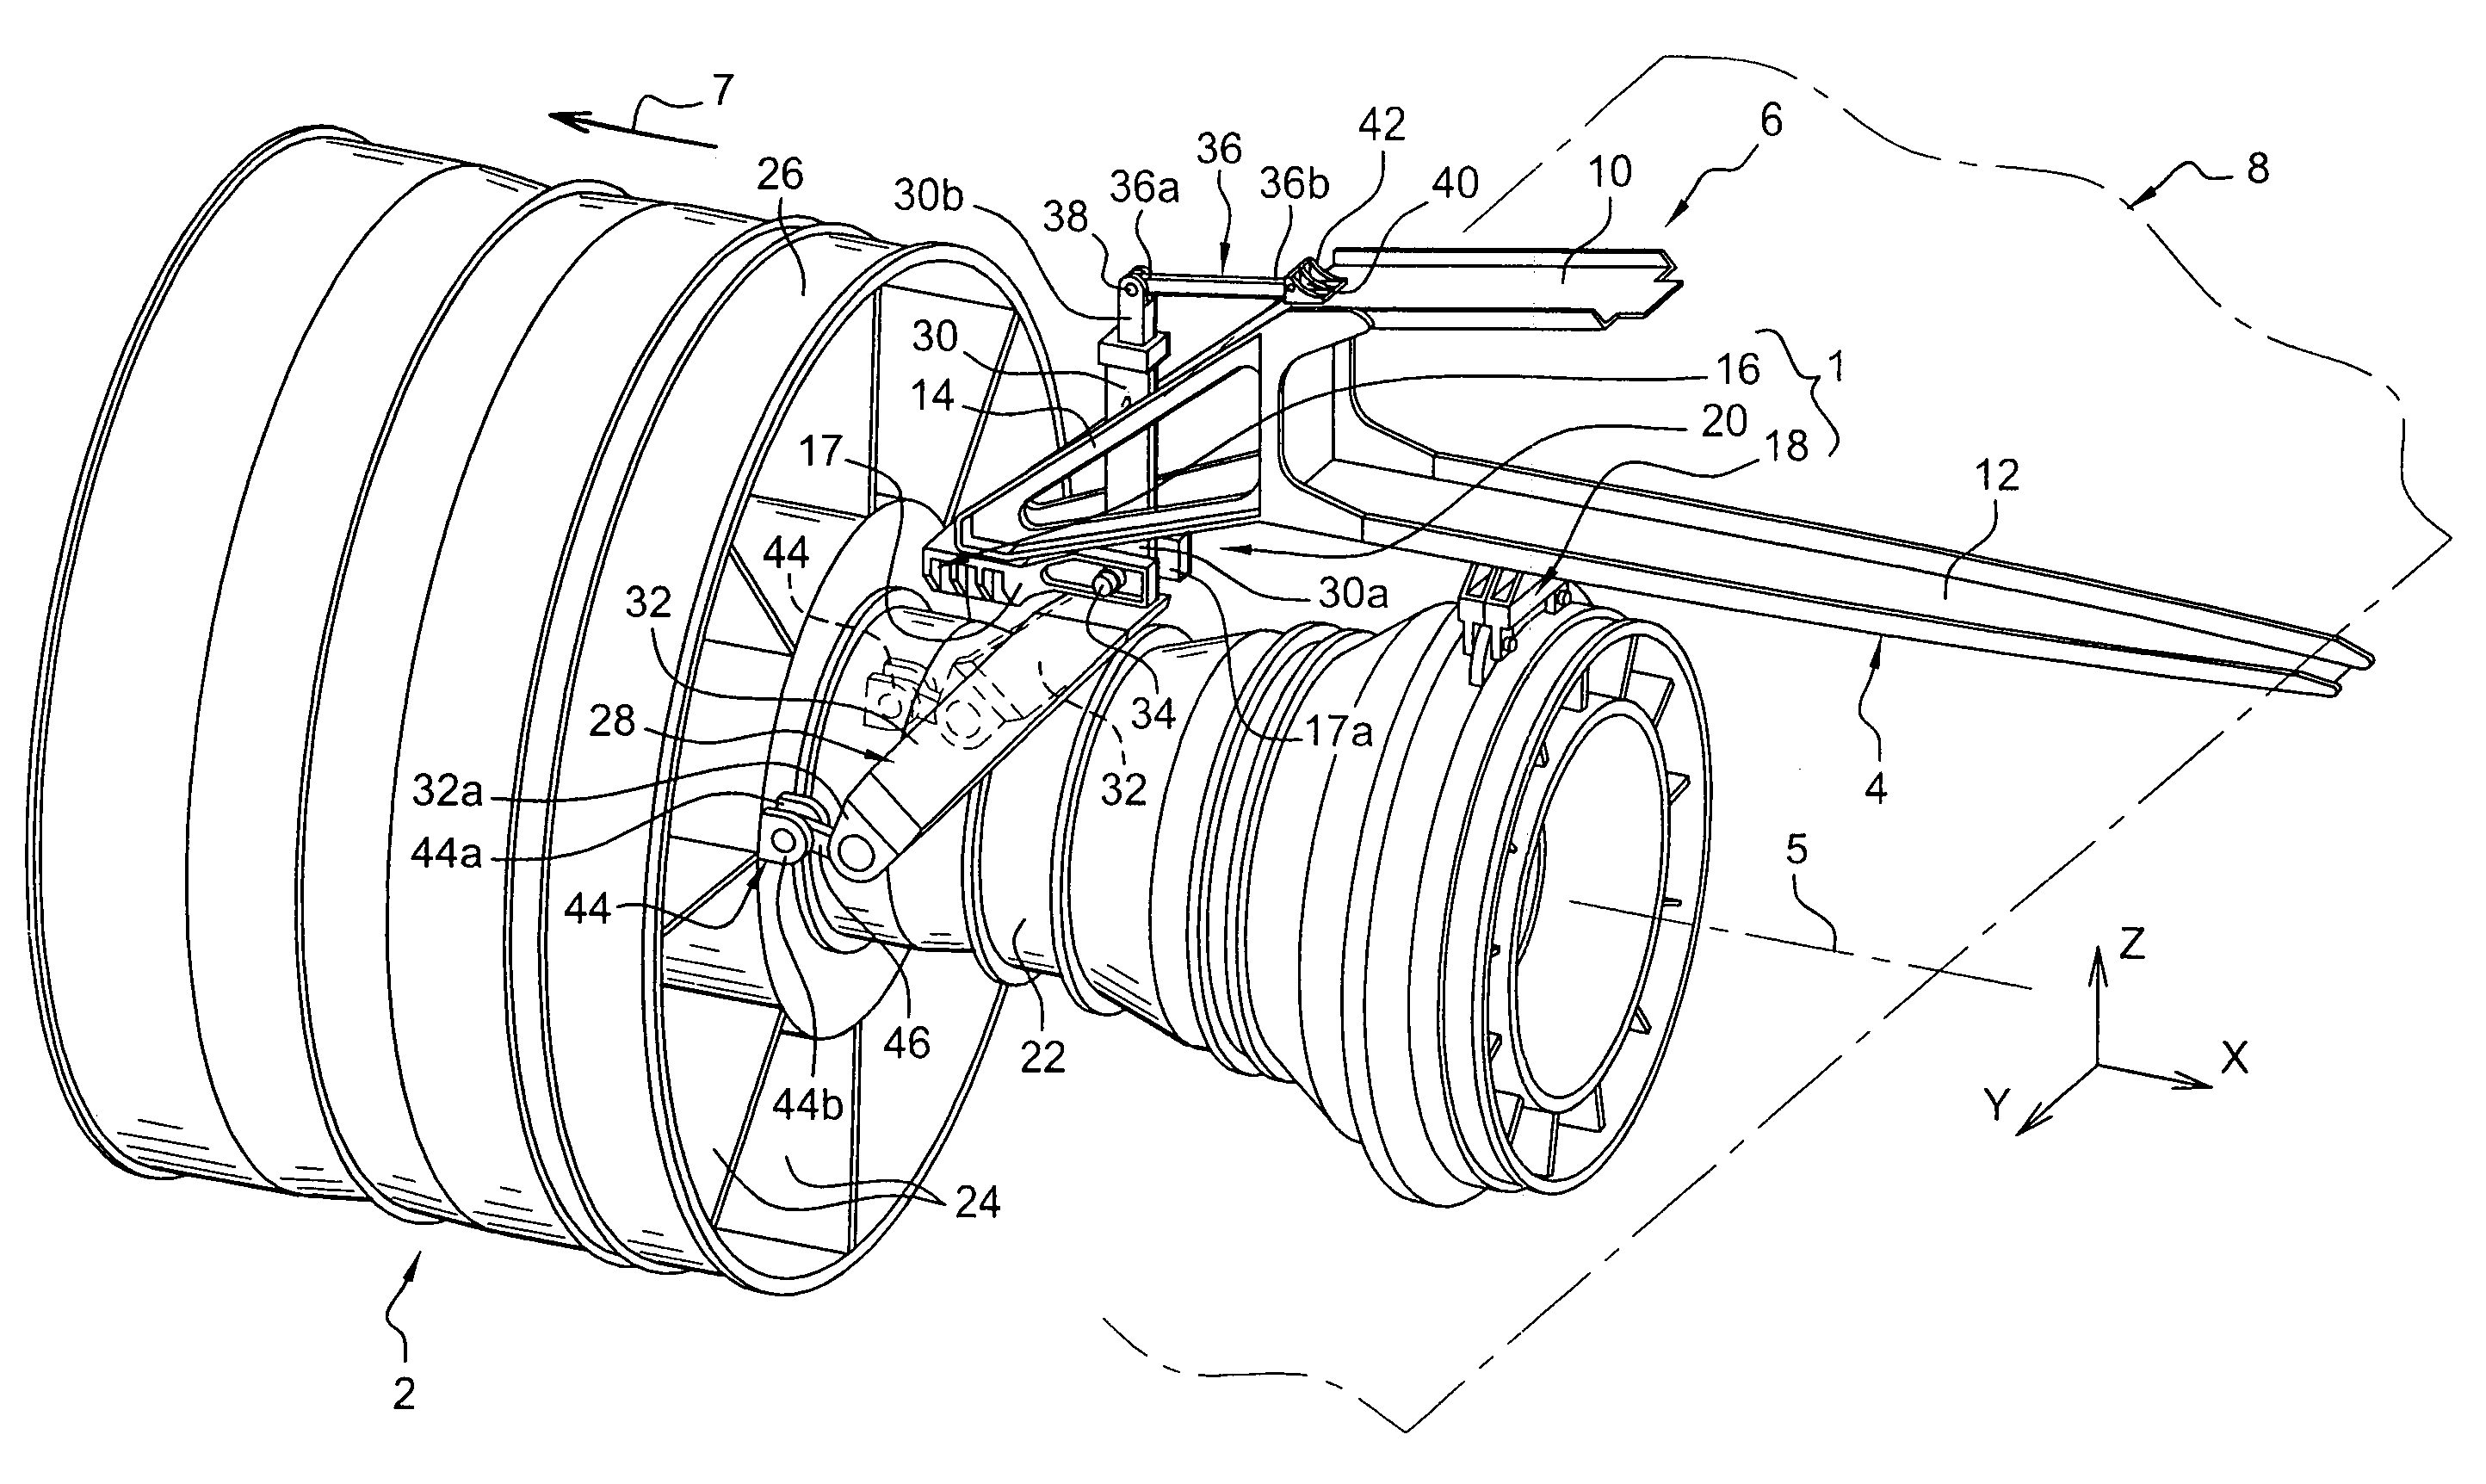 Mounting system inserted between an aircraft engine and a rigid structure of an attachment strut fixed under a wing of this aircraft